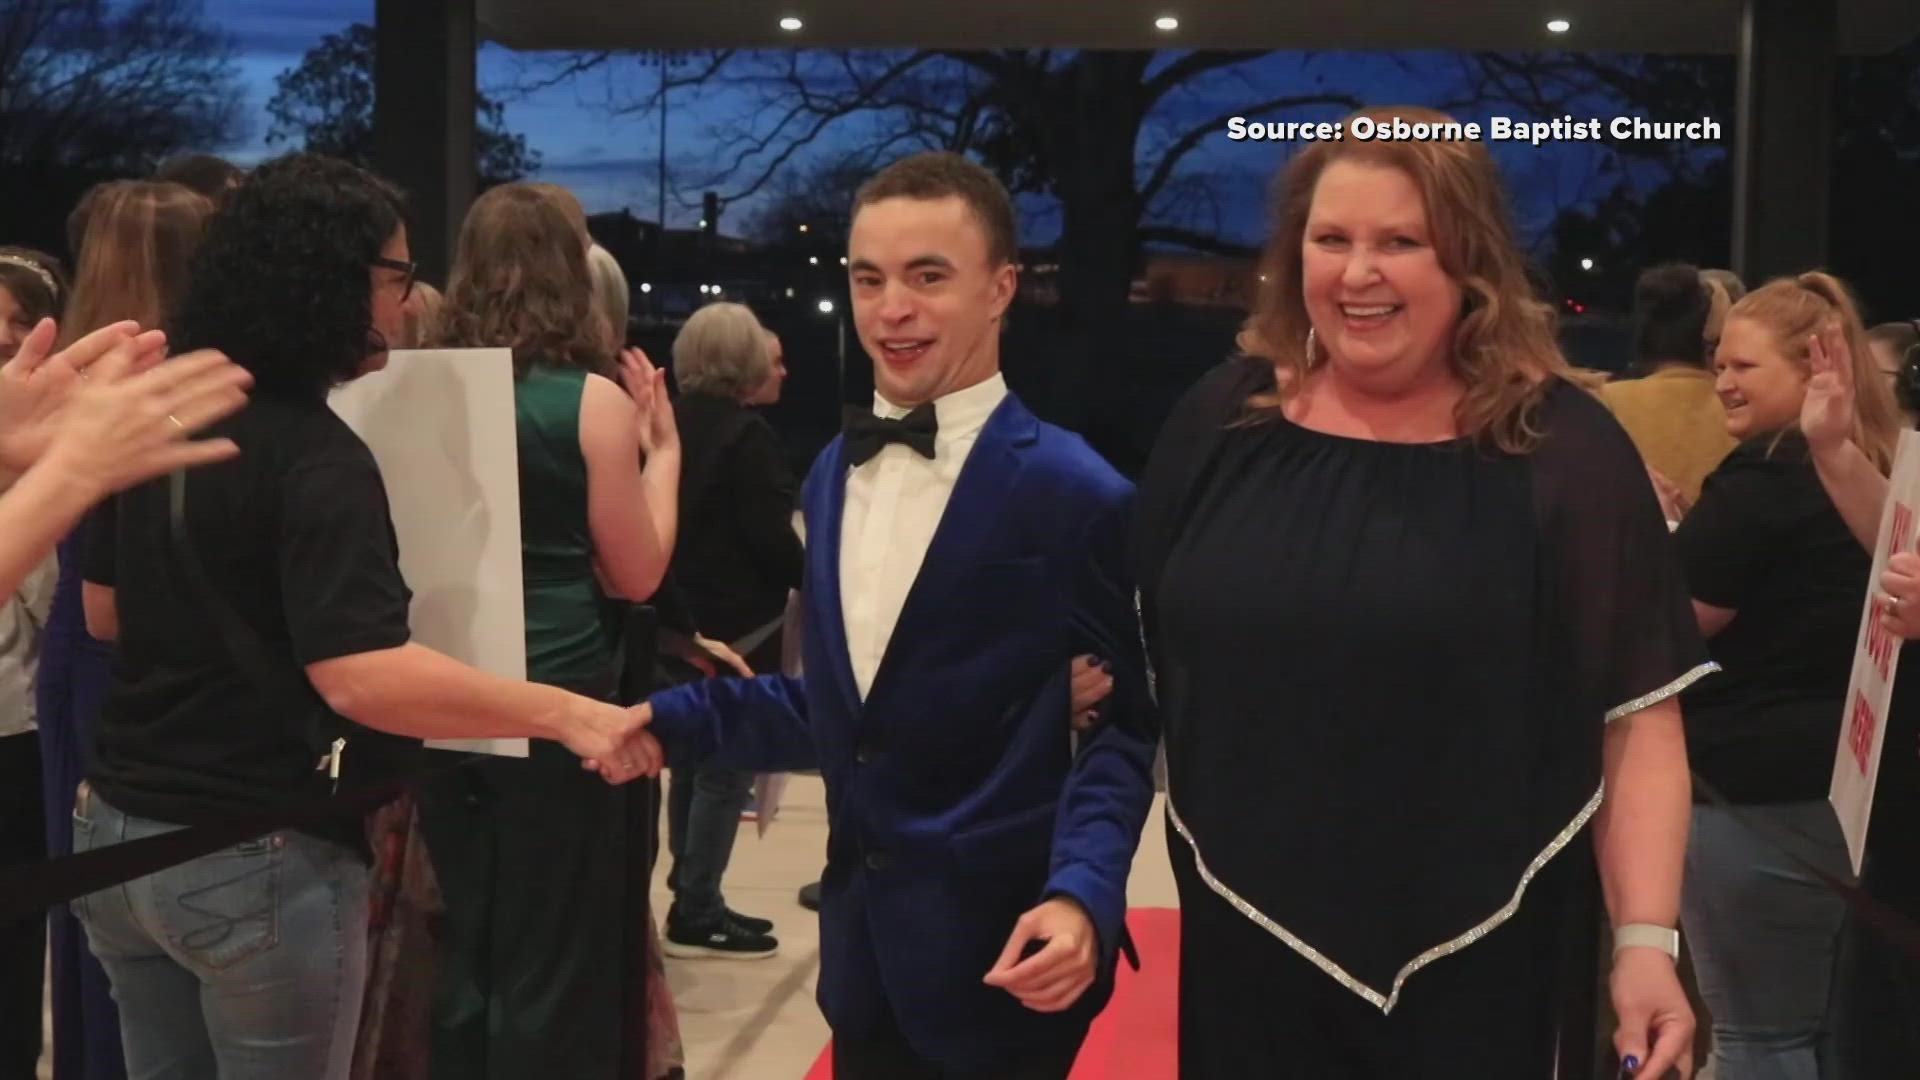 Osborne Baptist Church held a special red-carpet event for teenagers with disabilities.